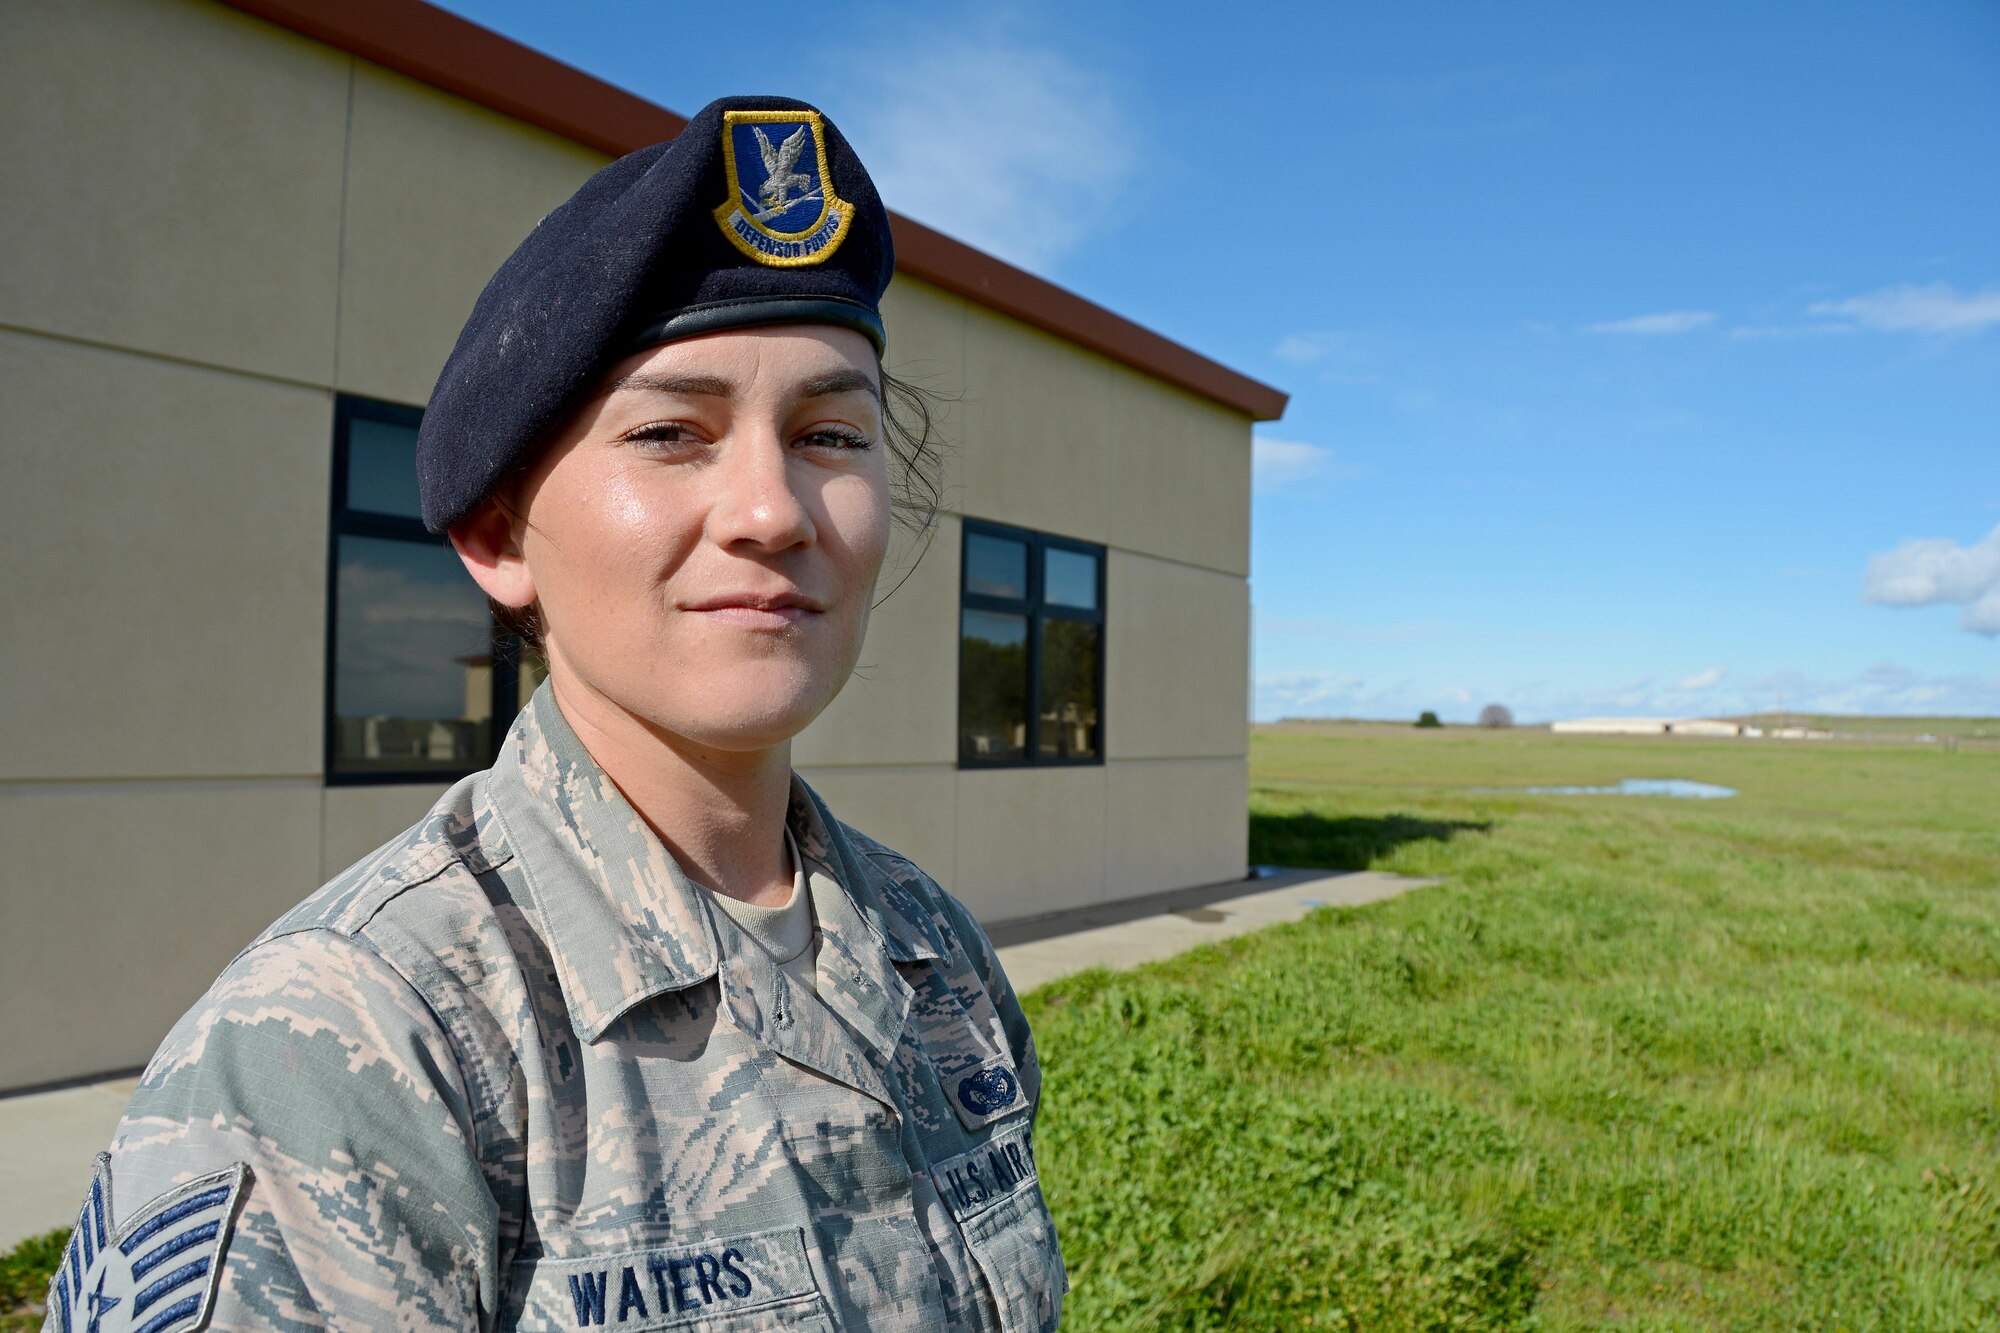 Staff Sgt. Rochelle Waters, 349th Security Forces Squadron member, poses for a photo outside of the combat arms building at Travis Air Force Base, Calif., on March 9, 2017. Waters recently took part in Exercise Cope North 2017 in Guam. She and Staff Sgt. Dante Thomas, another 349 SFS member, saved the life of a drowning child during an off-day on the assignment. (U.S. Air Force photo/Staff Sgt. Daniel Phelps)